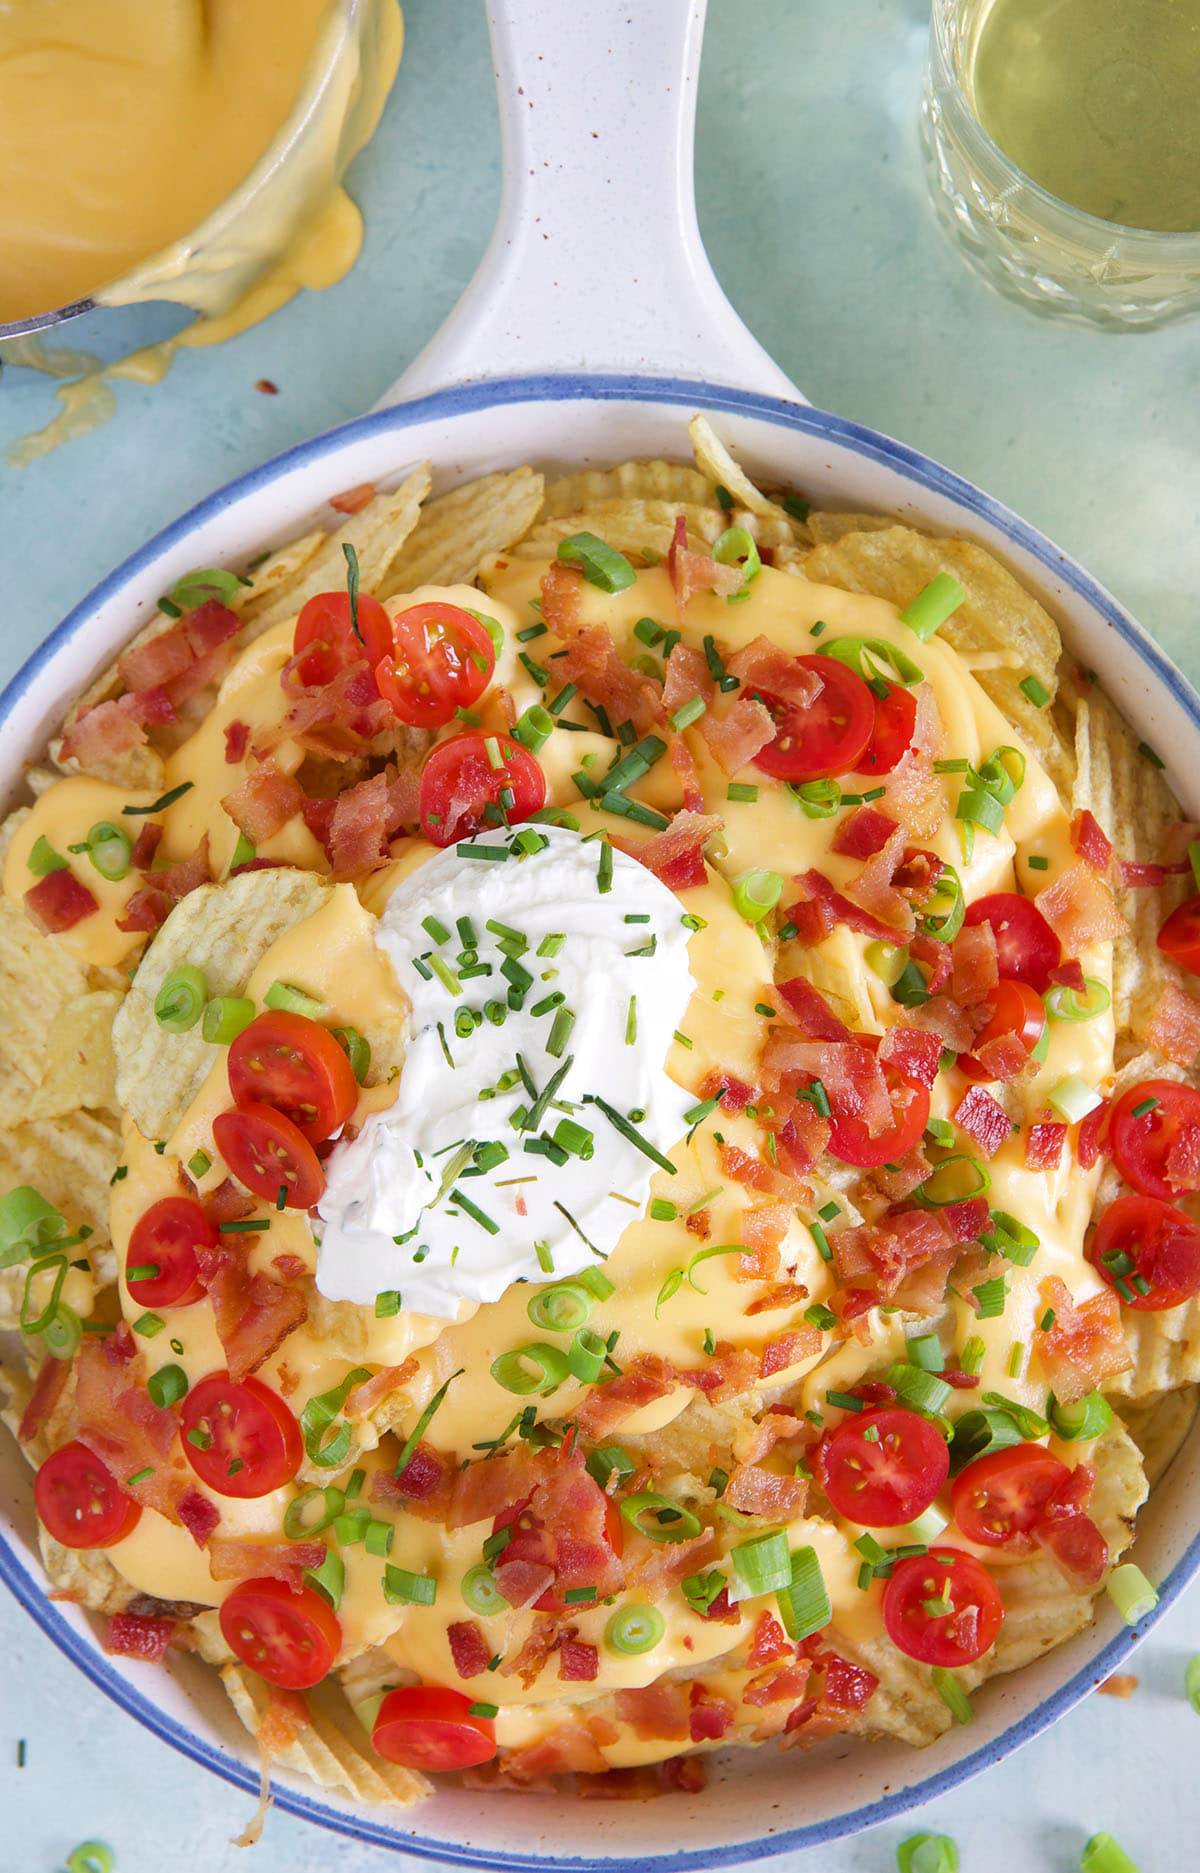 Sour cream, chives, tomatoes and green onions are sprinkled on a serving of beer cheese nachos.